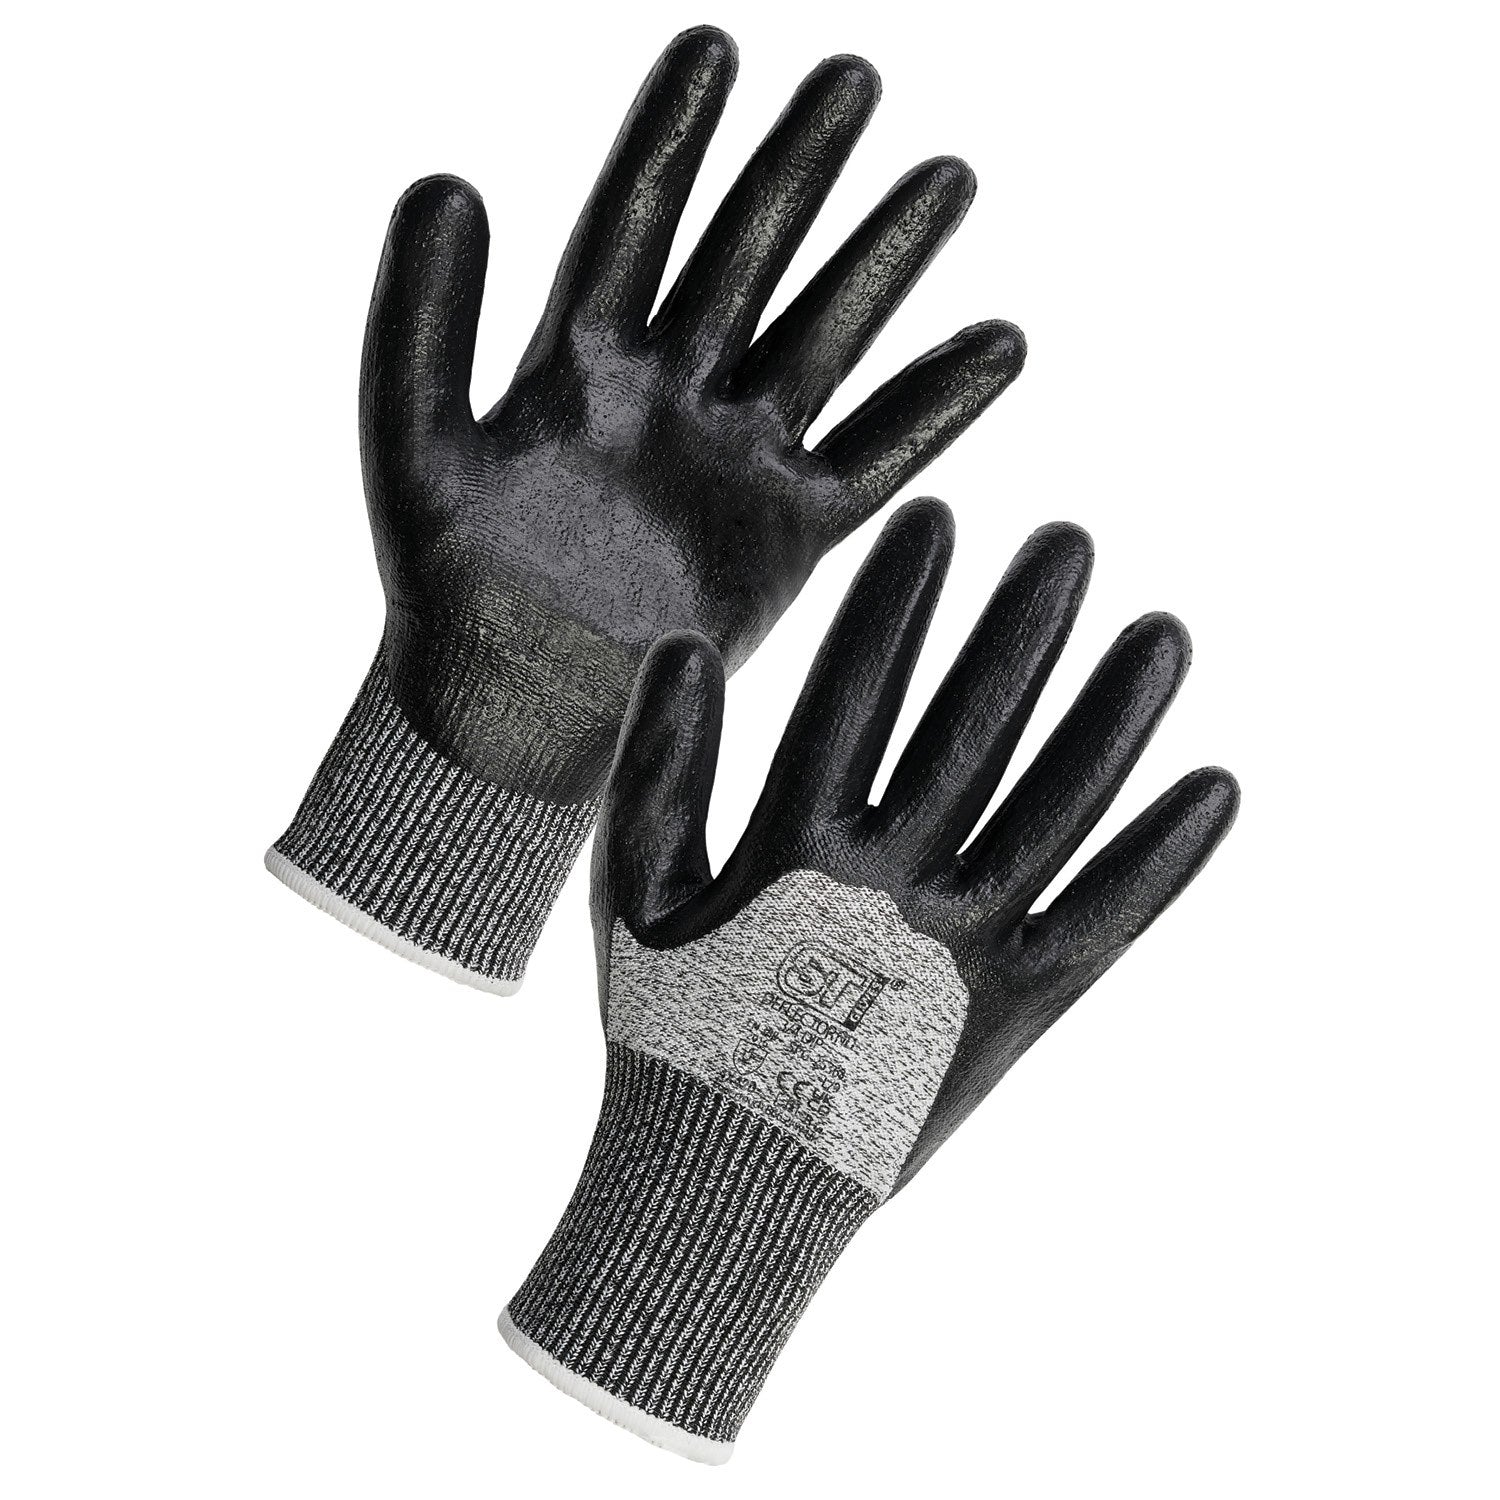 Supertouch Supertouch Deflector ND 3/4 Dip Cut Resistant Gloves - G112